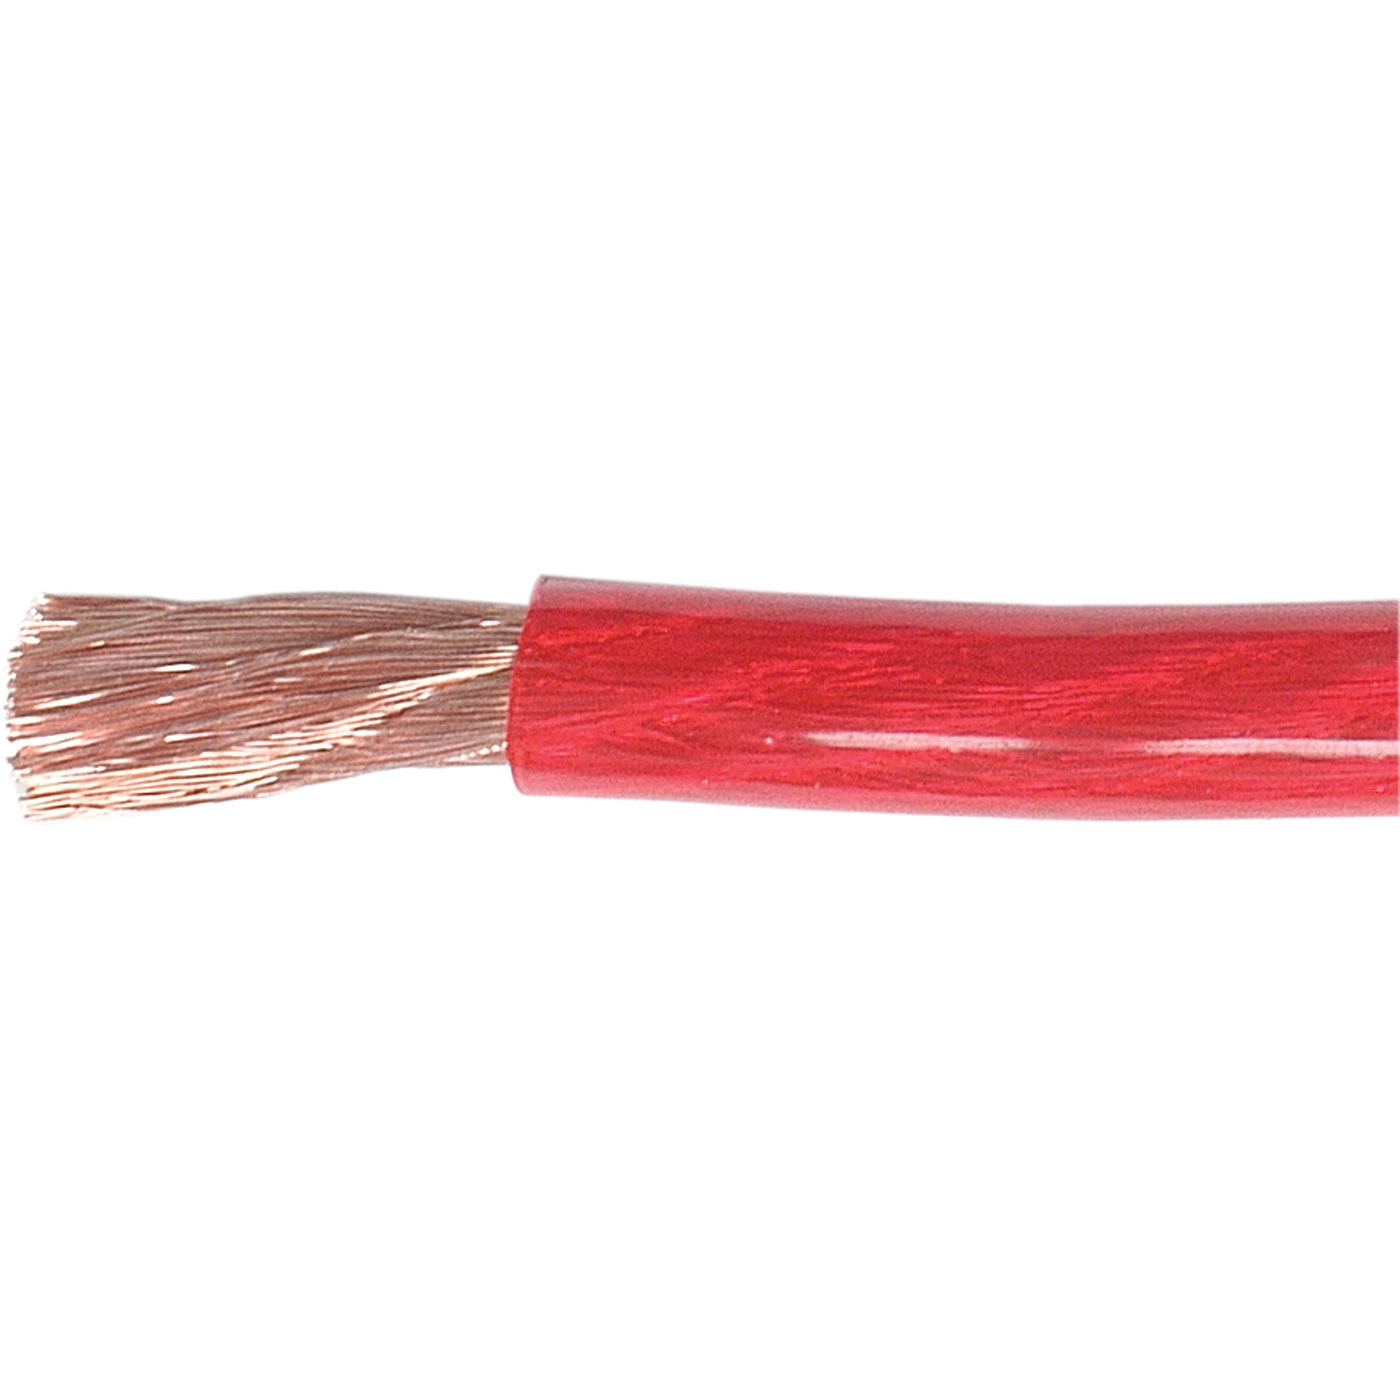 Red power cable photo